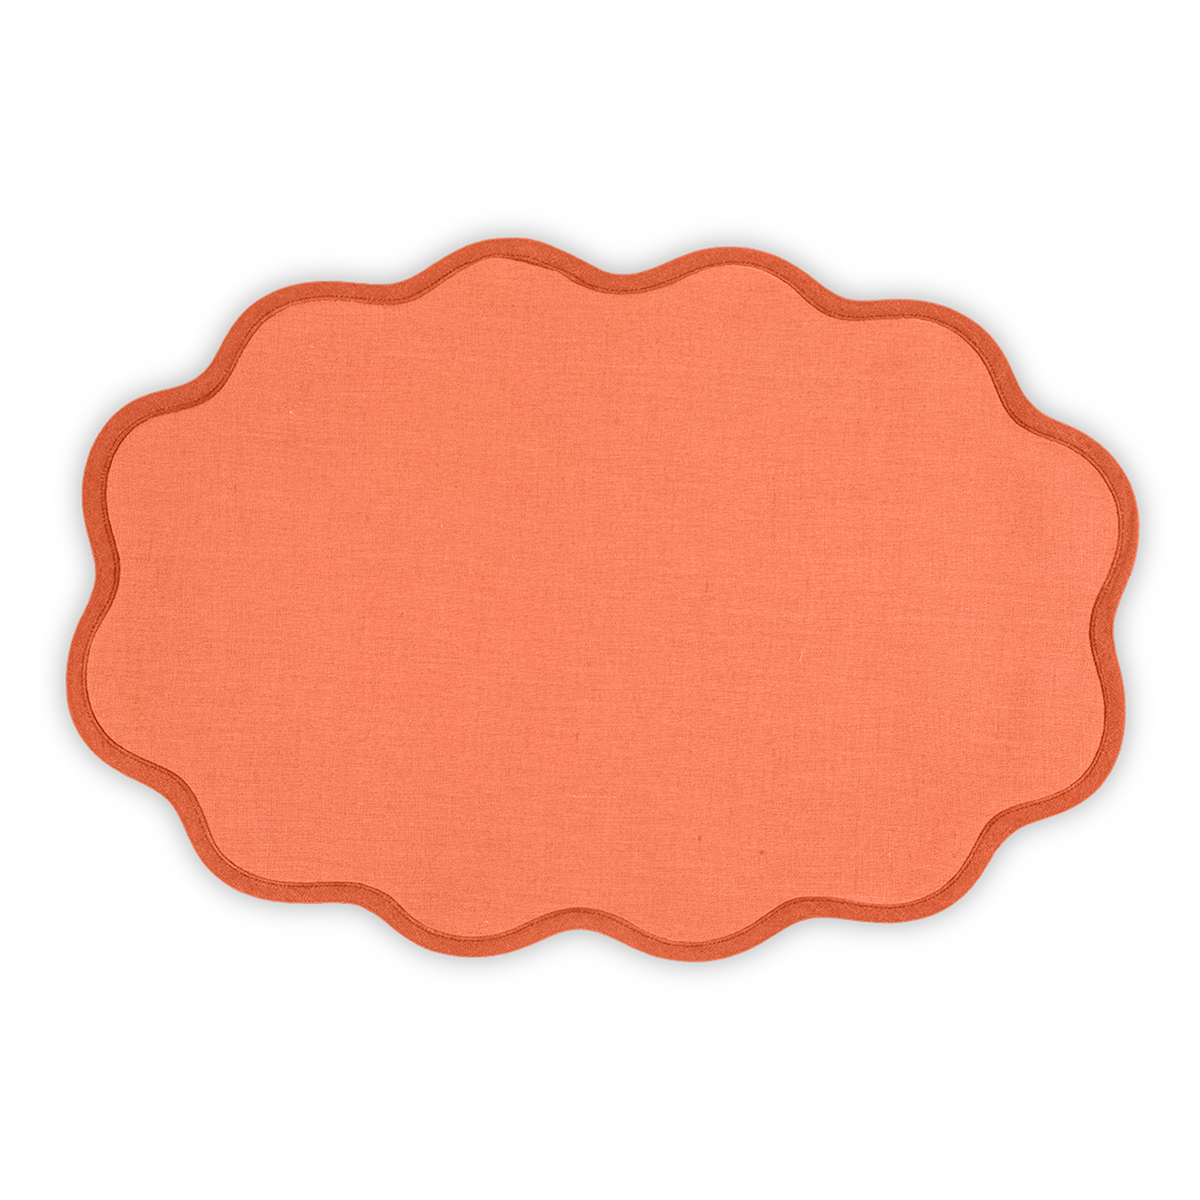 Oval Placemat of Matouk Scallop Edge Table Linens in Color Carnelian Persimmon